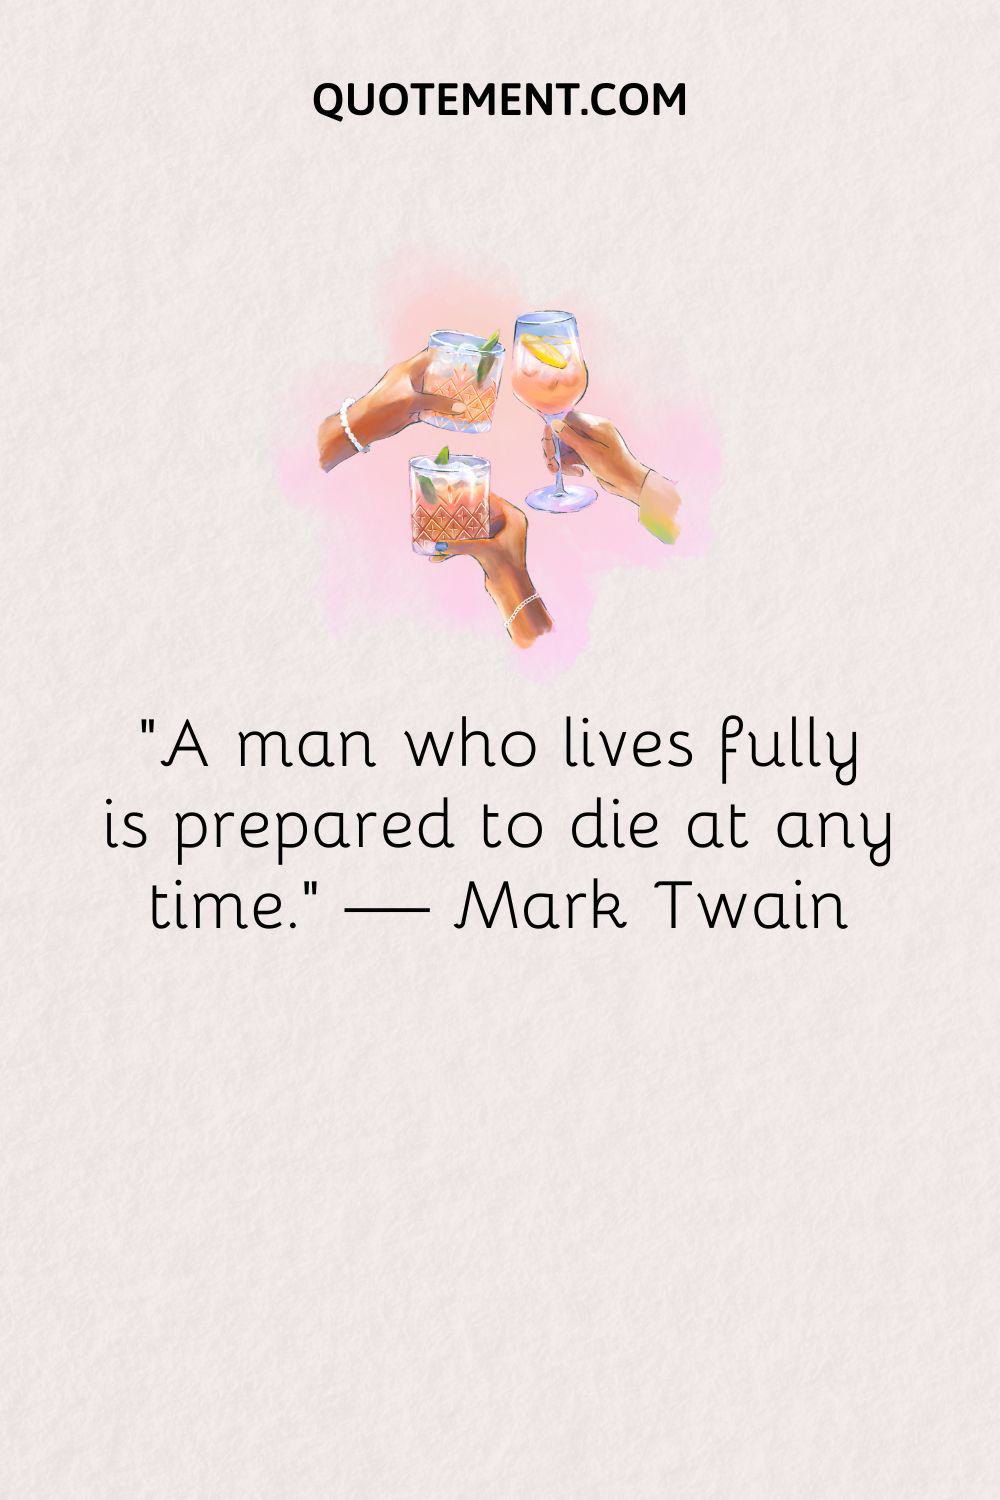 “A man who lives fully is prepared to die at any time.” — Mark Twain